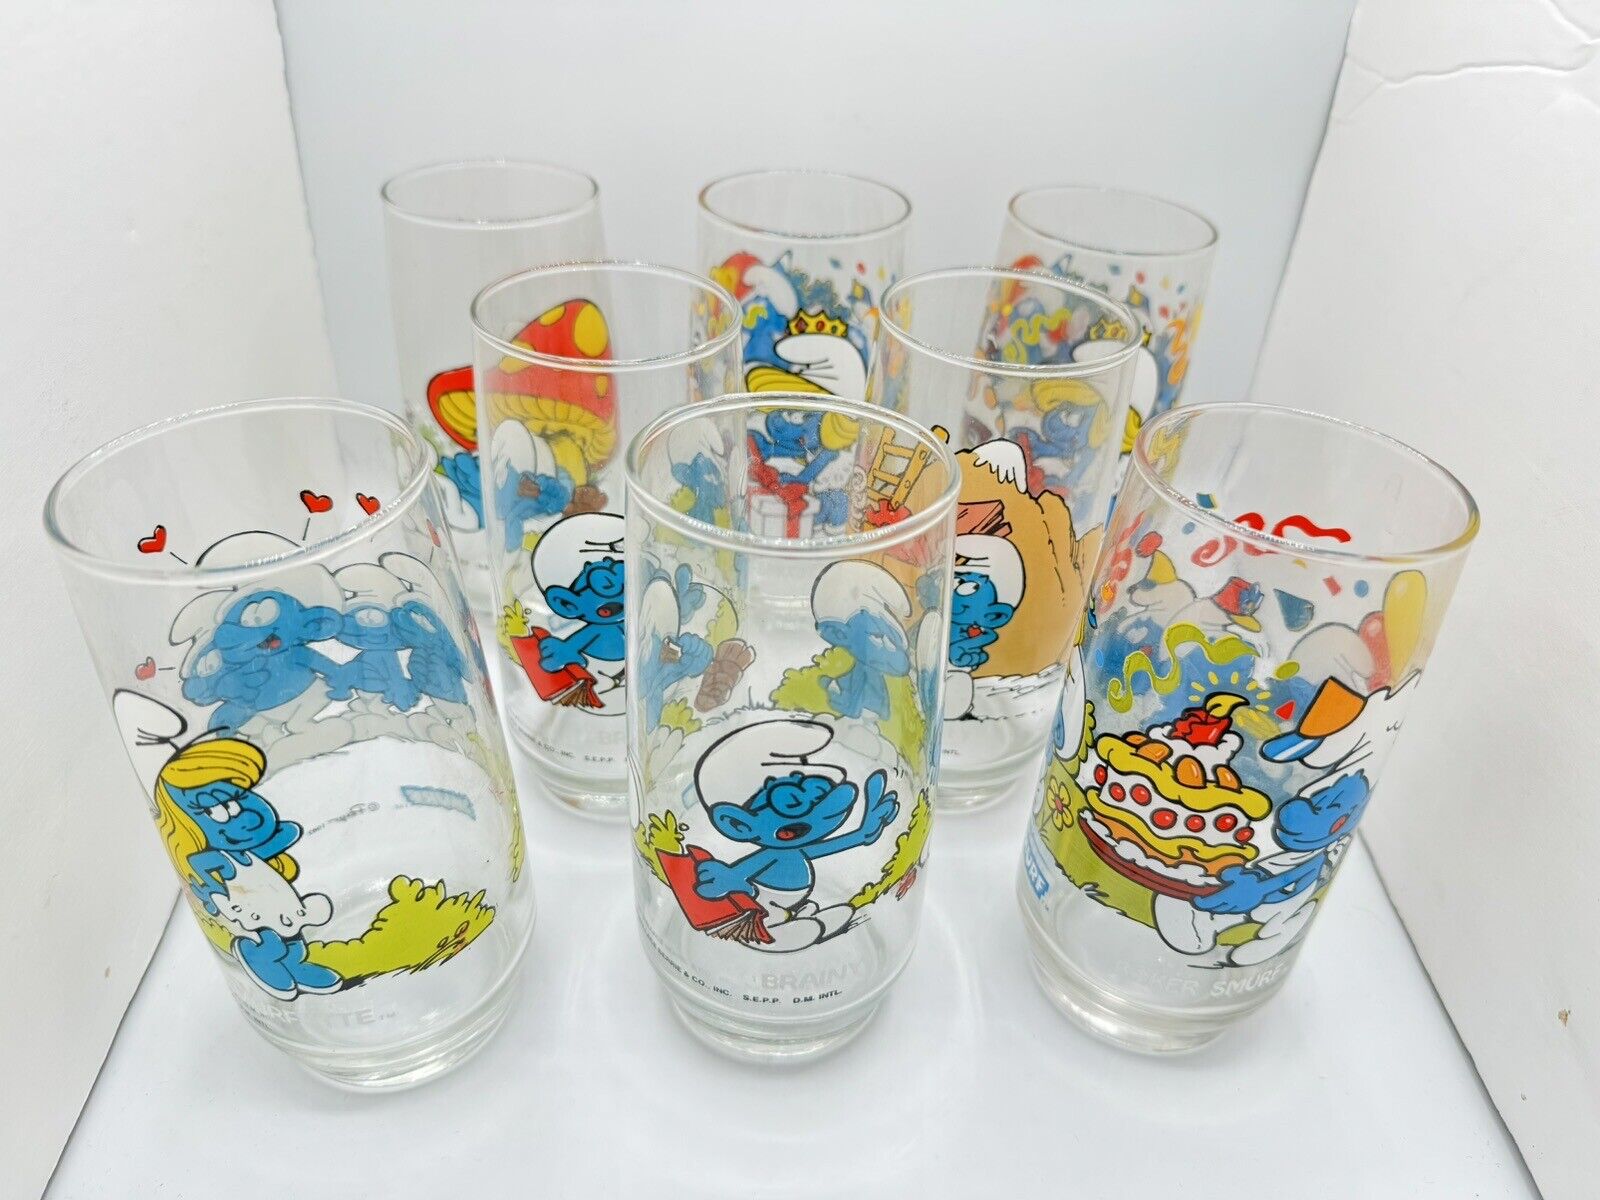 Smurfs Peyo Lot 1982-1984 Collectable Drinking Glasses (8) Vintage